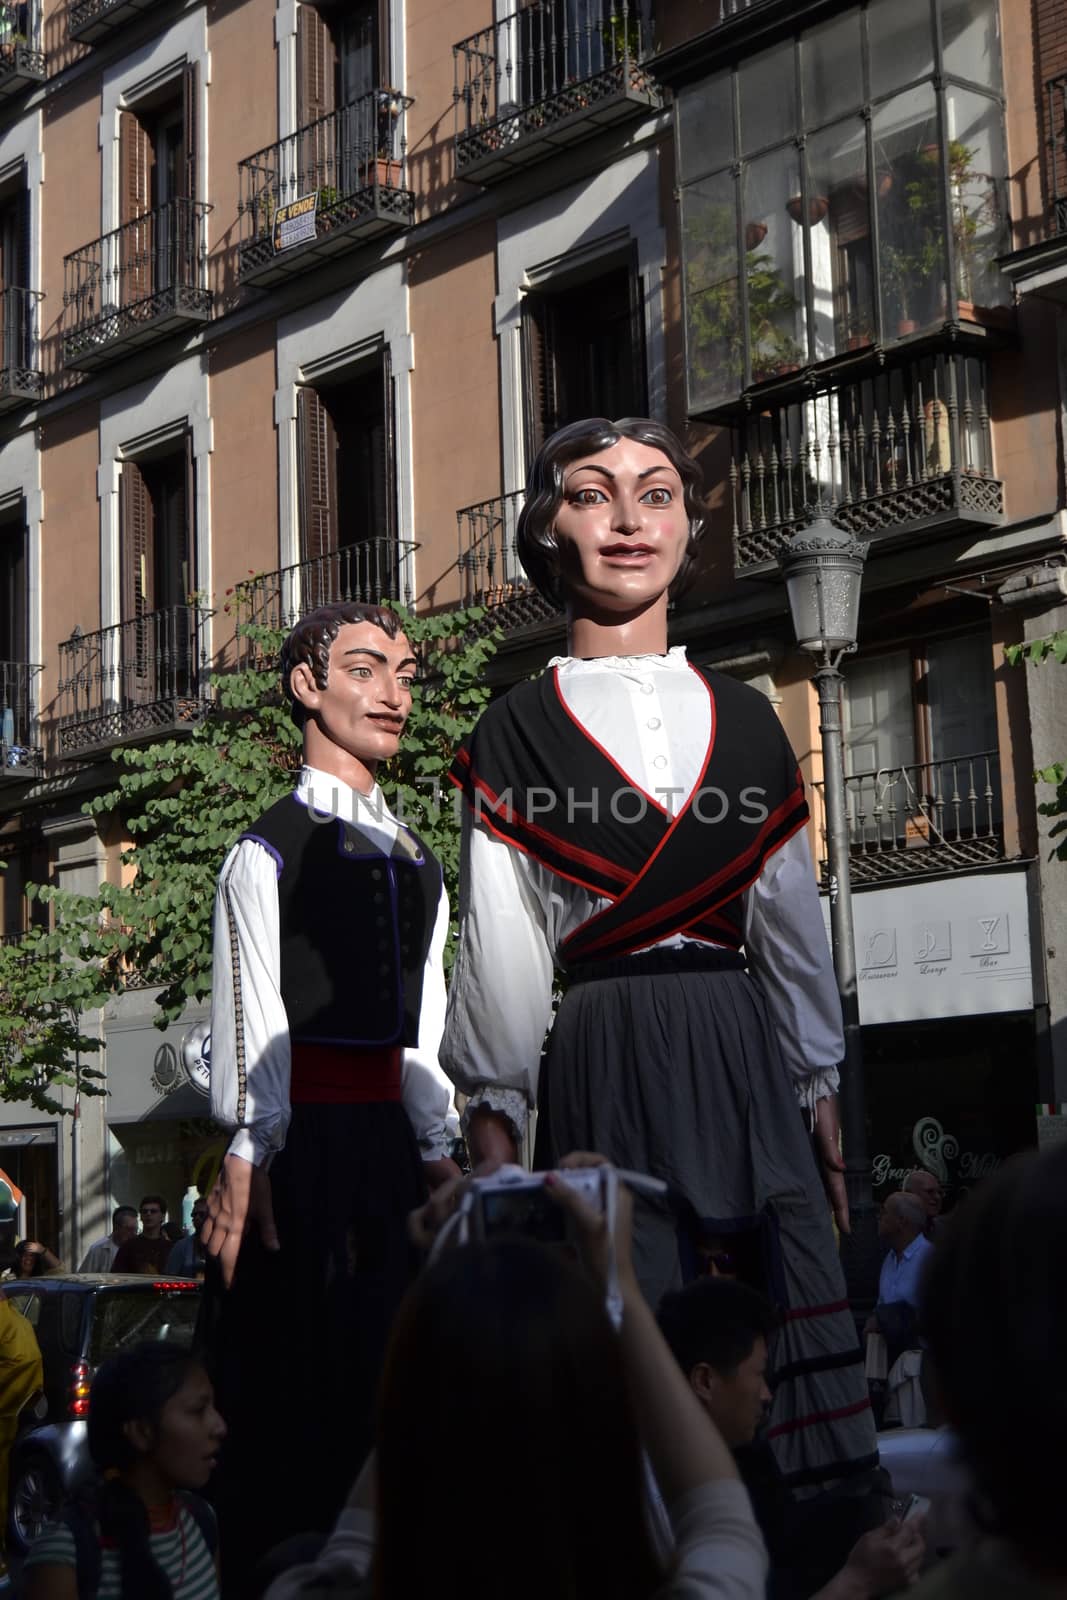 Giants and big heads in Madrid, celebration of San Isidro 2014